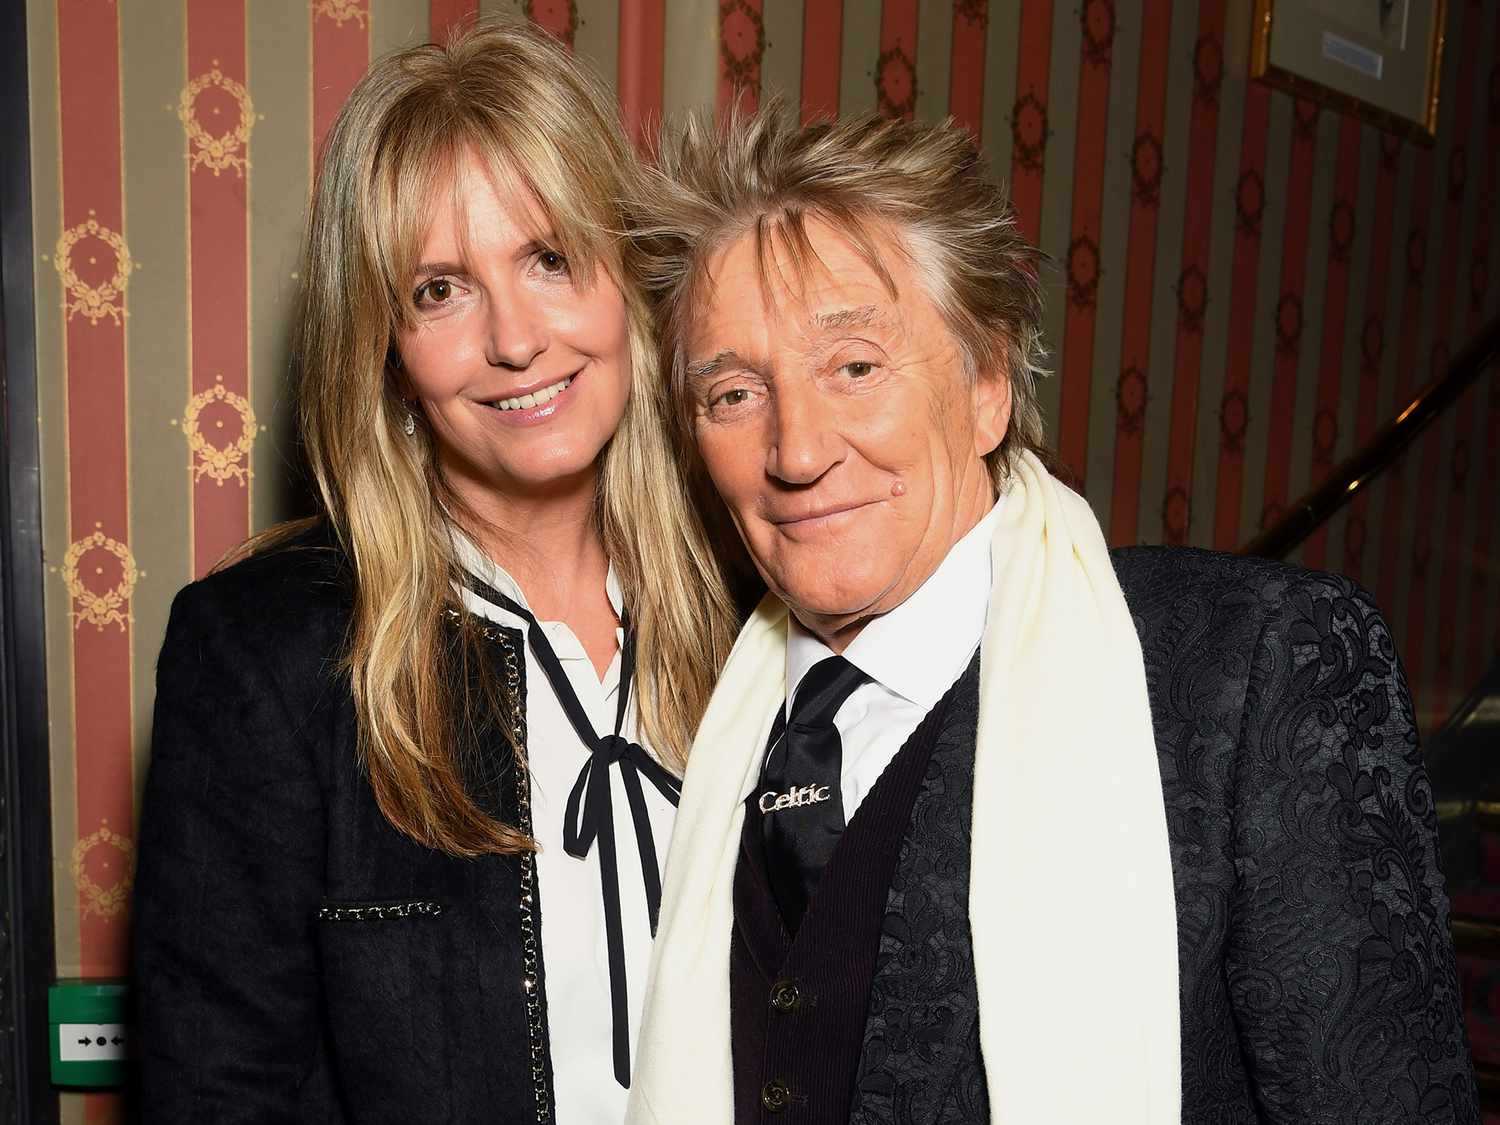 Rod Stewart & Penny Lancaster's surprise vermont thrift store spree leaves town aflutter